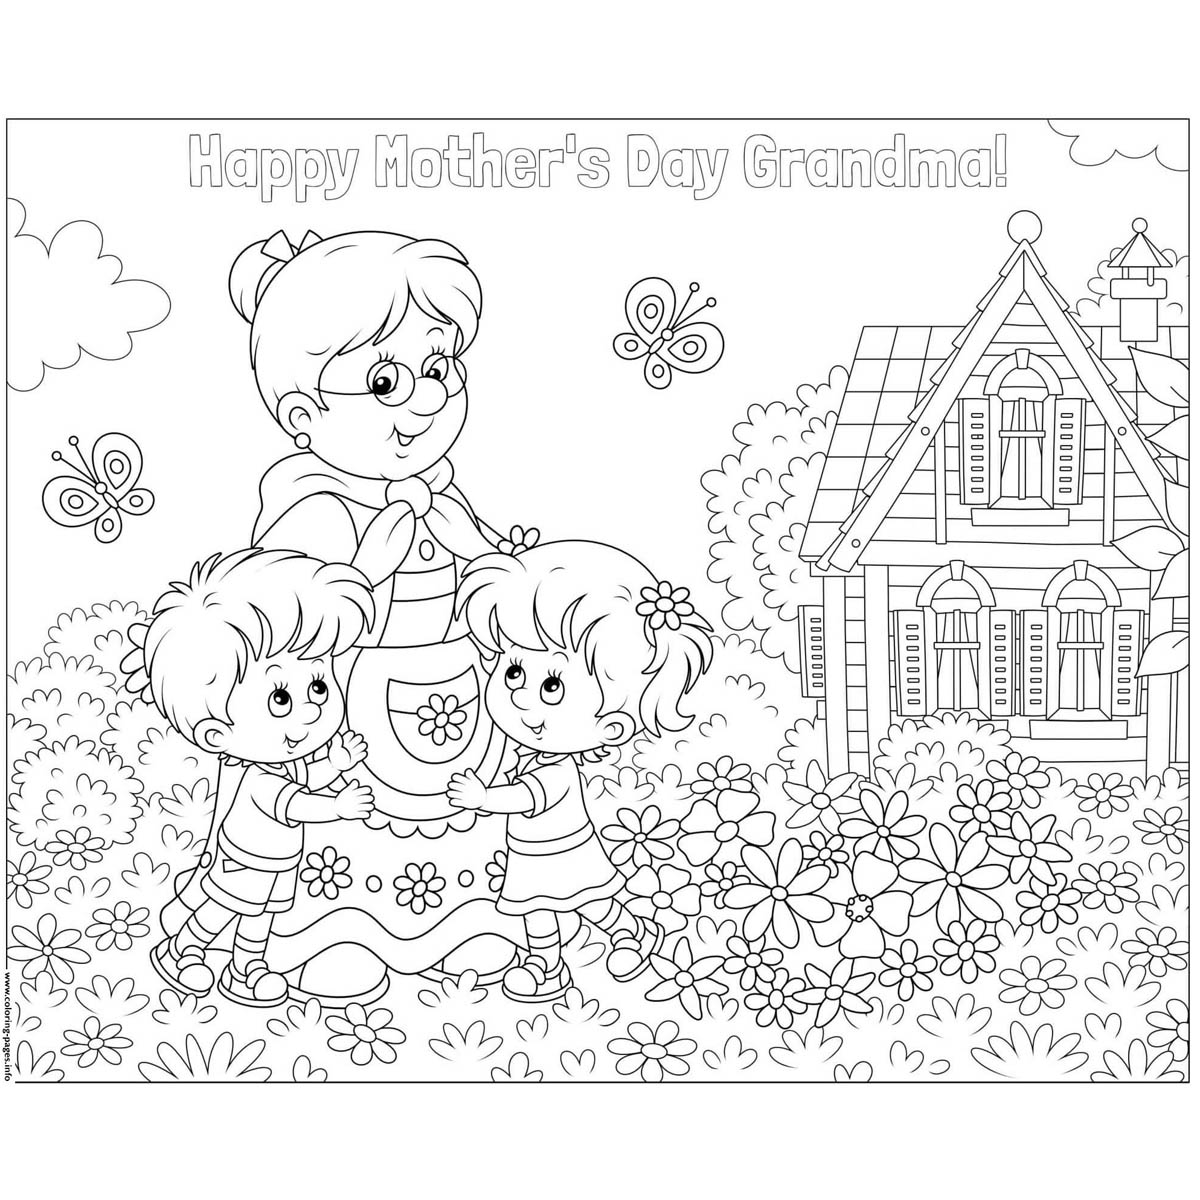 Free Happy Mother's Day Coloring Pages for Grandma printable